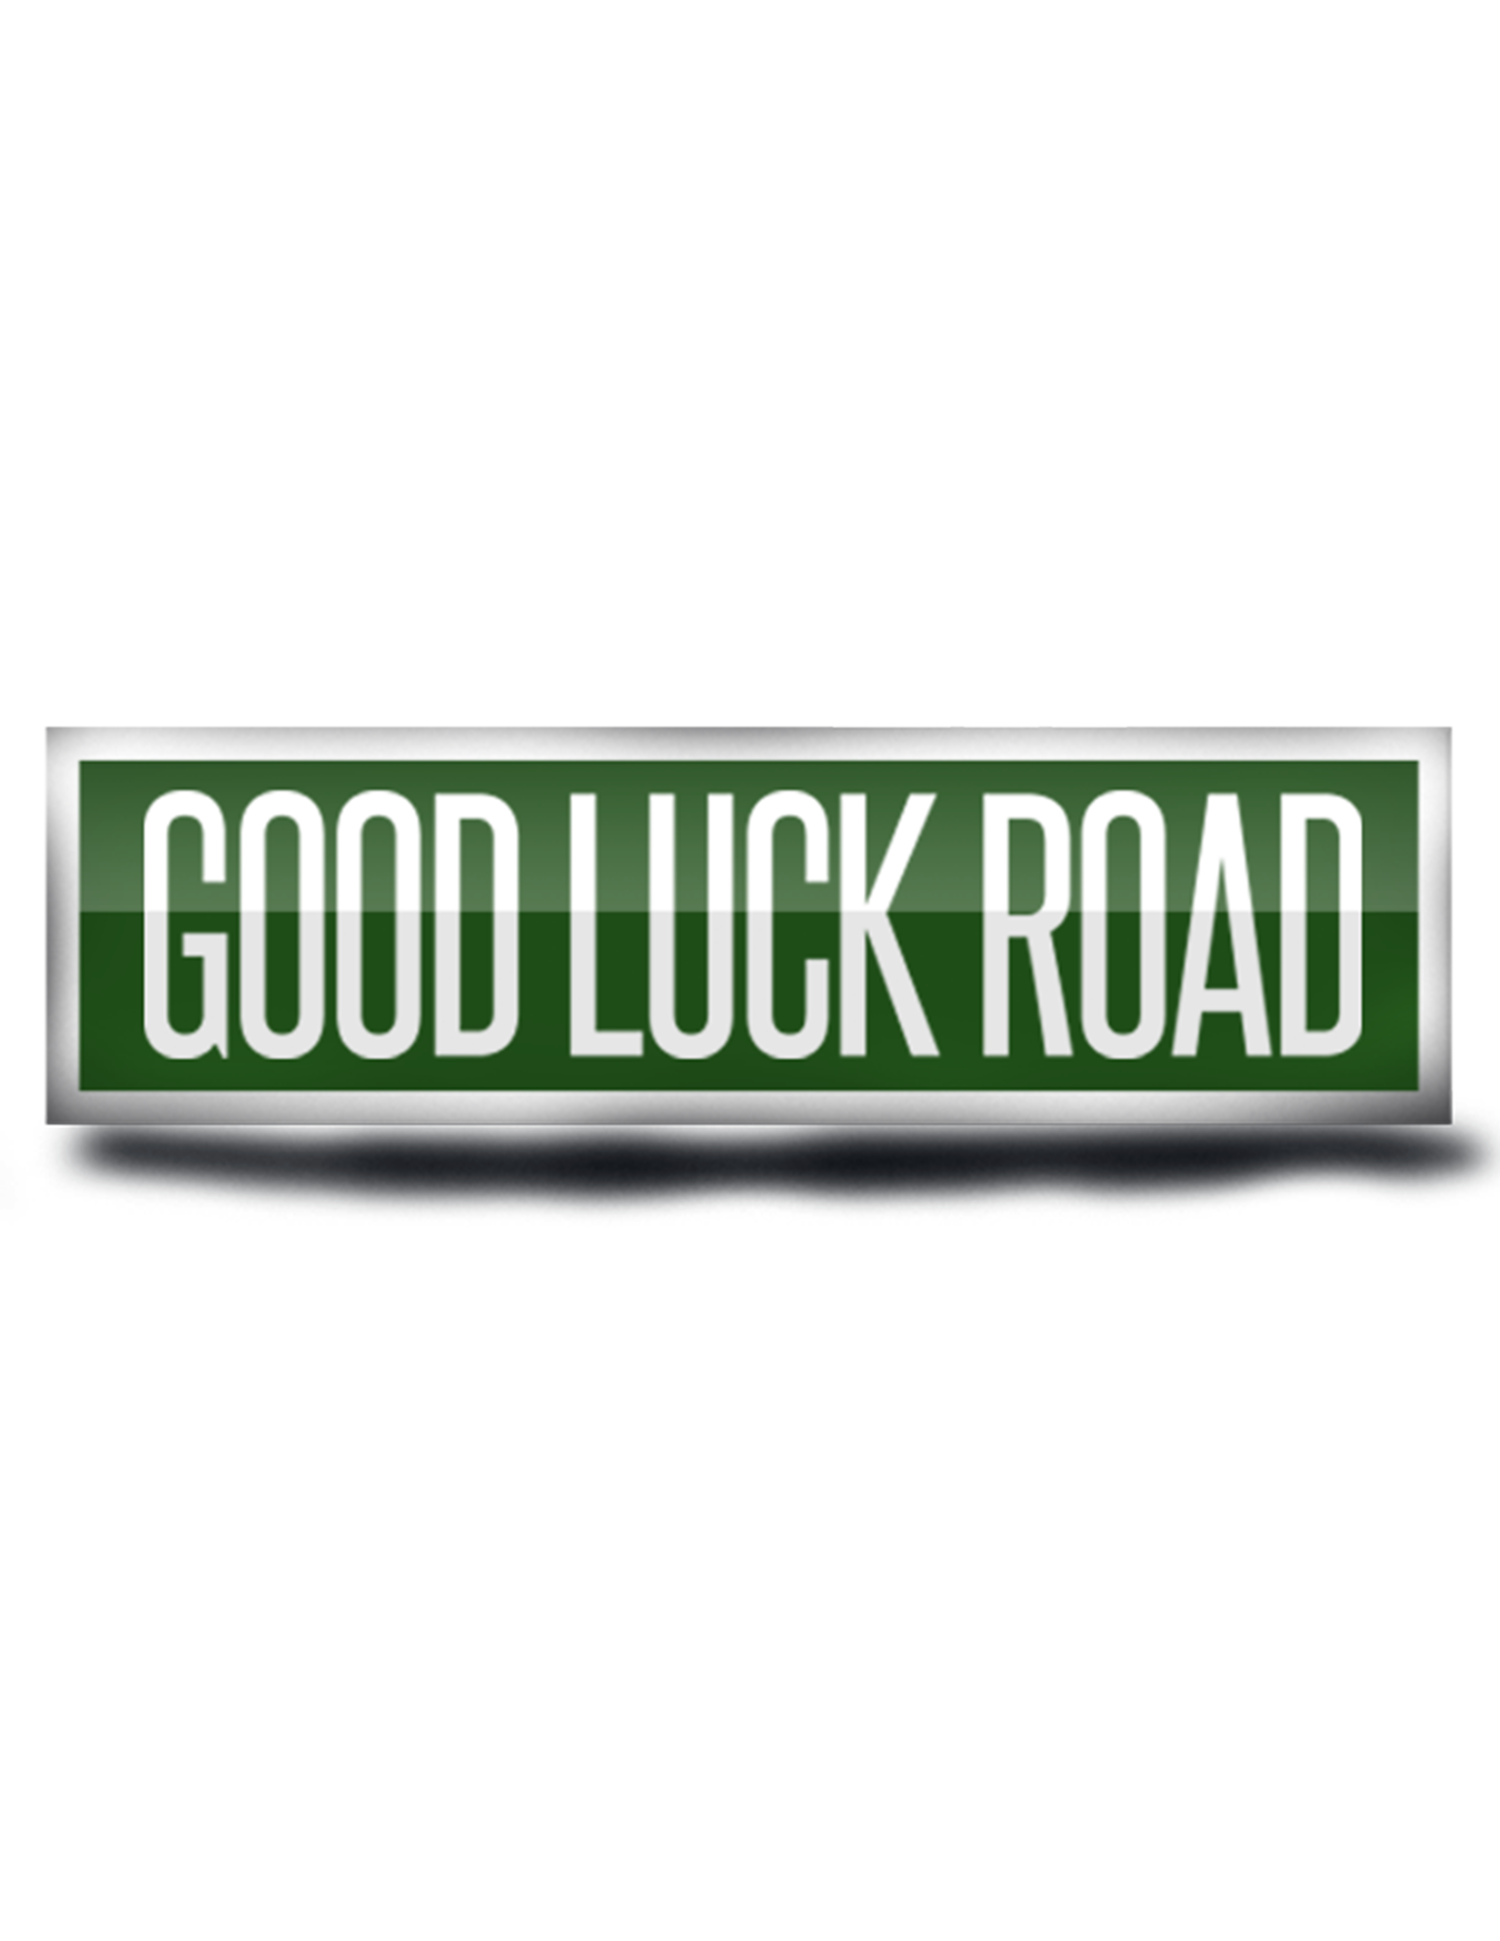 Good Luck Road Films and Photography